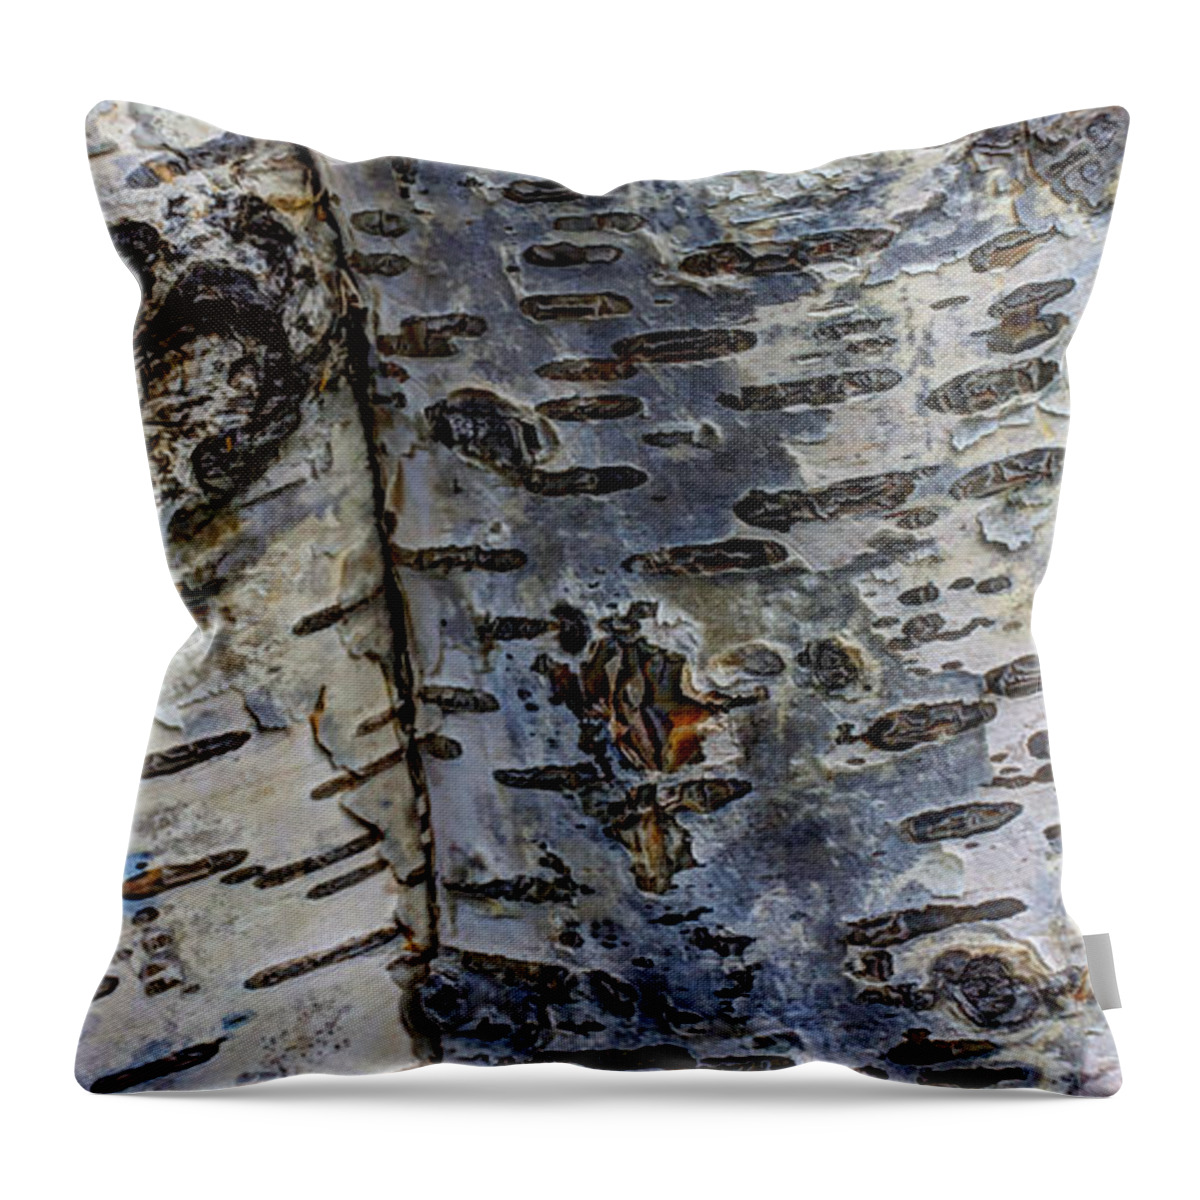 Organic Throw Pillow featuring the photograph Tree People by Heidi Smith